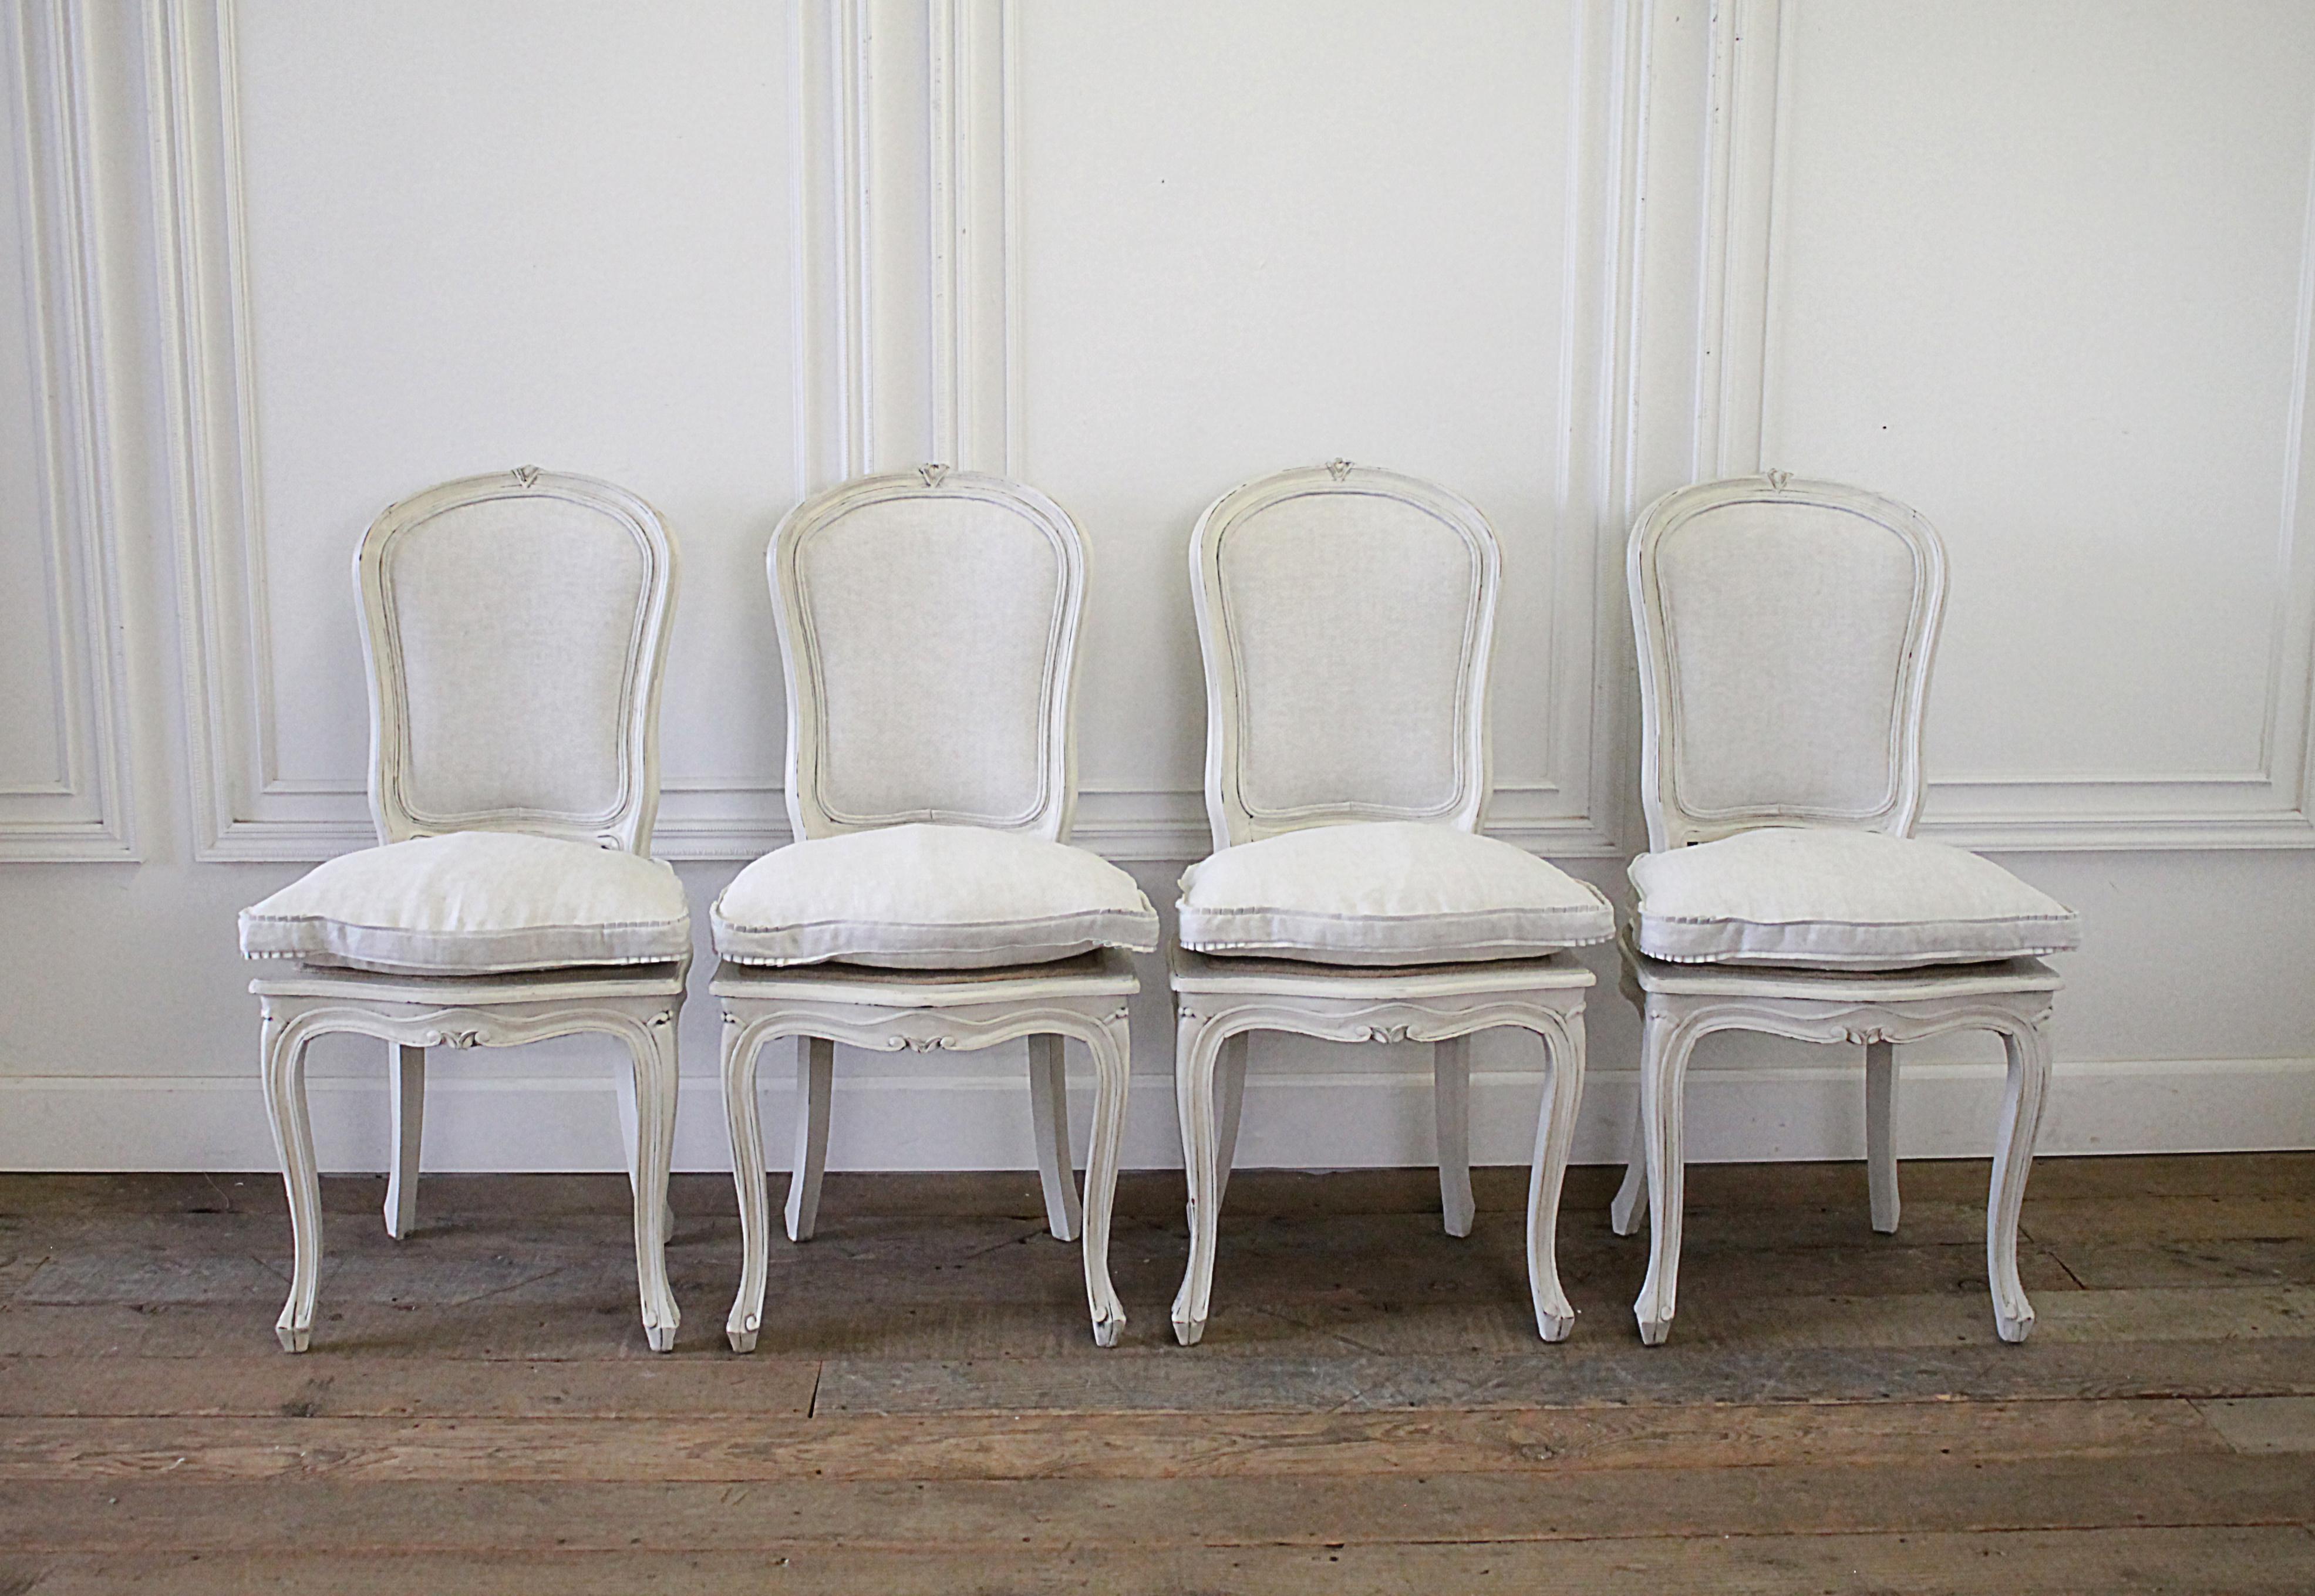 Set of 4 painted and upholstered linen Louis XV style dining chairs
Painted in our signature soft white, with subtle distressed edges, and finished with an antique glazed patina. We reupholstered the backs in our natural Belgian linen and added a